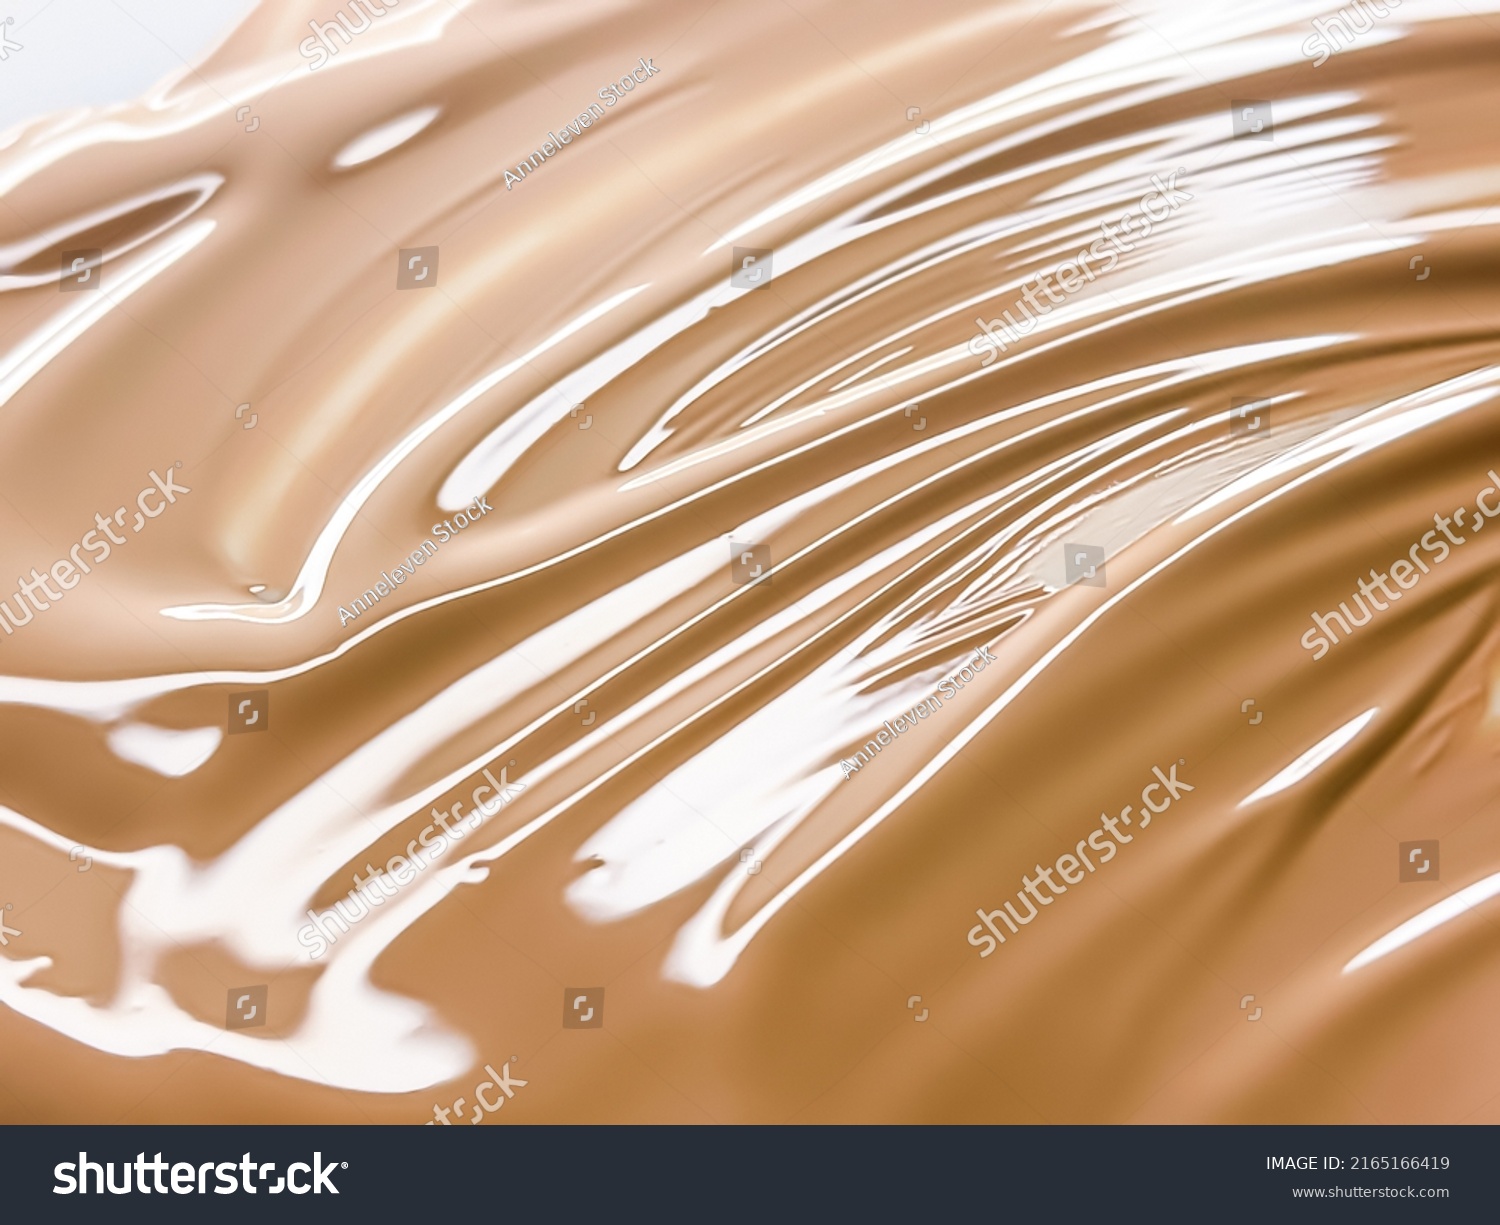 Glossy cosmetic texture, beige liquid foundation or concealer as beauty make-up product background, skincare cosmetics and luxury makeup brand design concept #2165166419